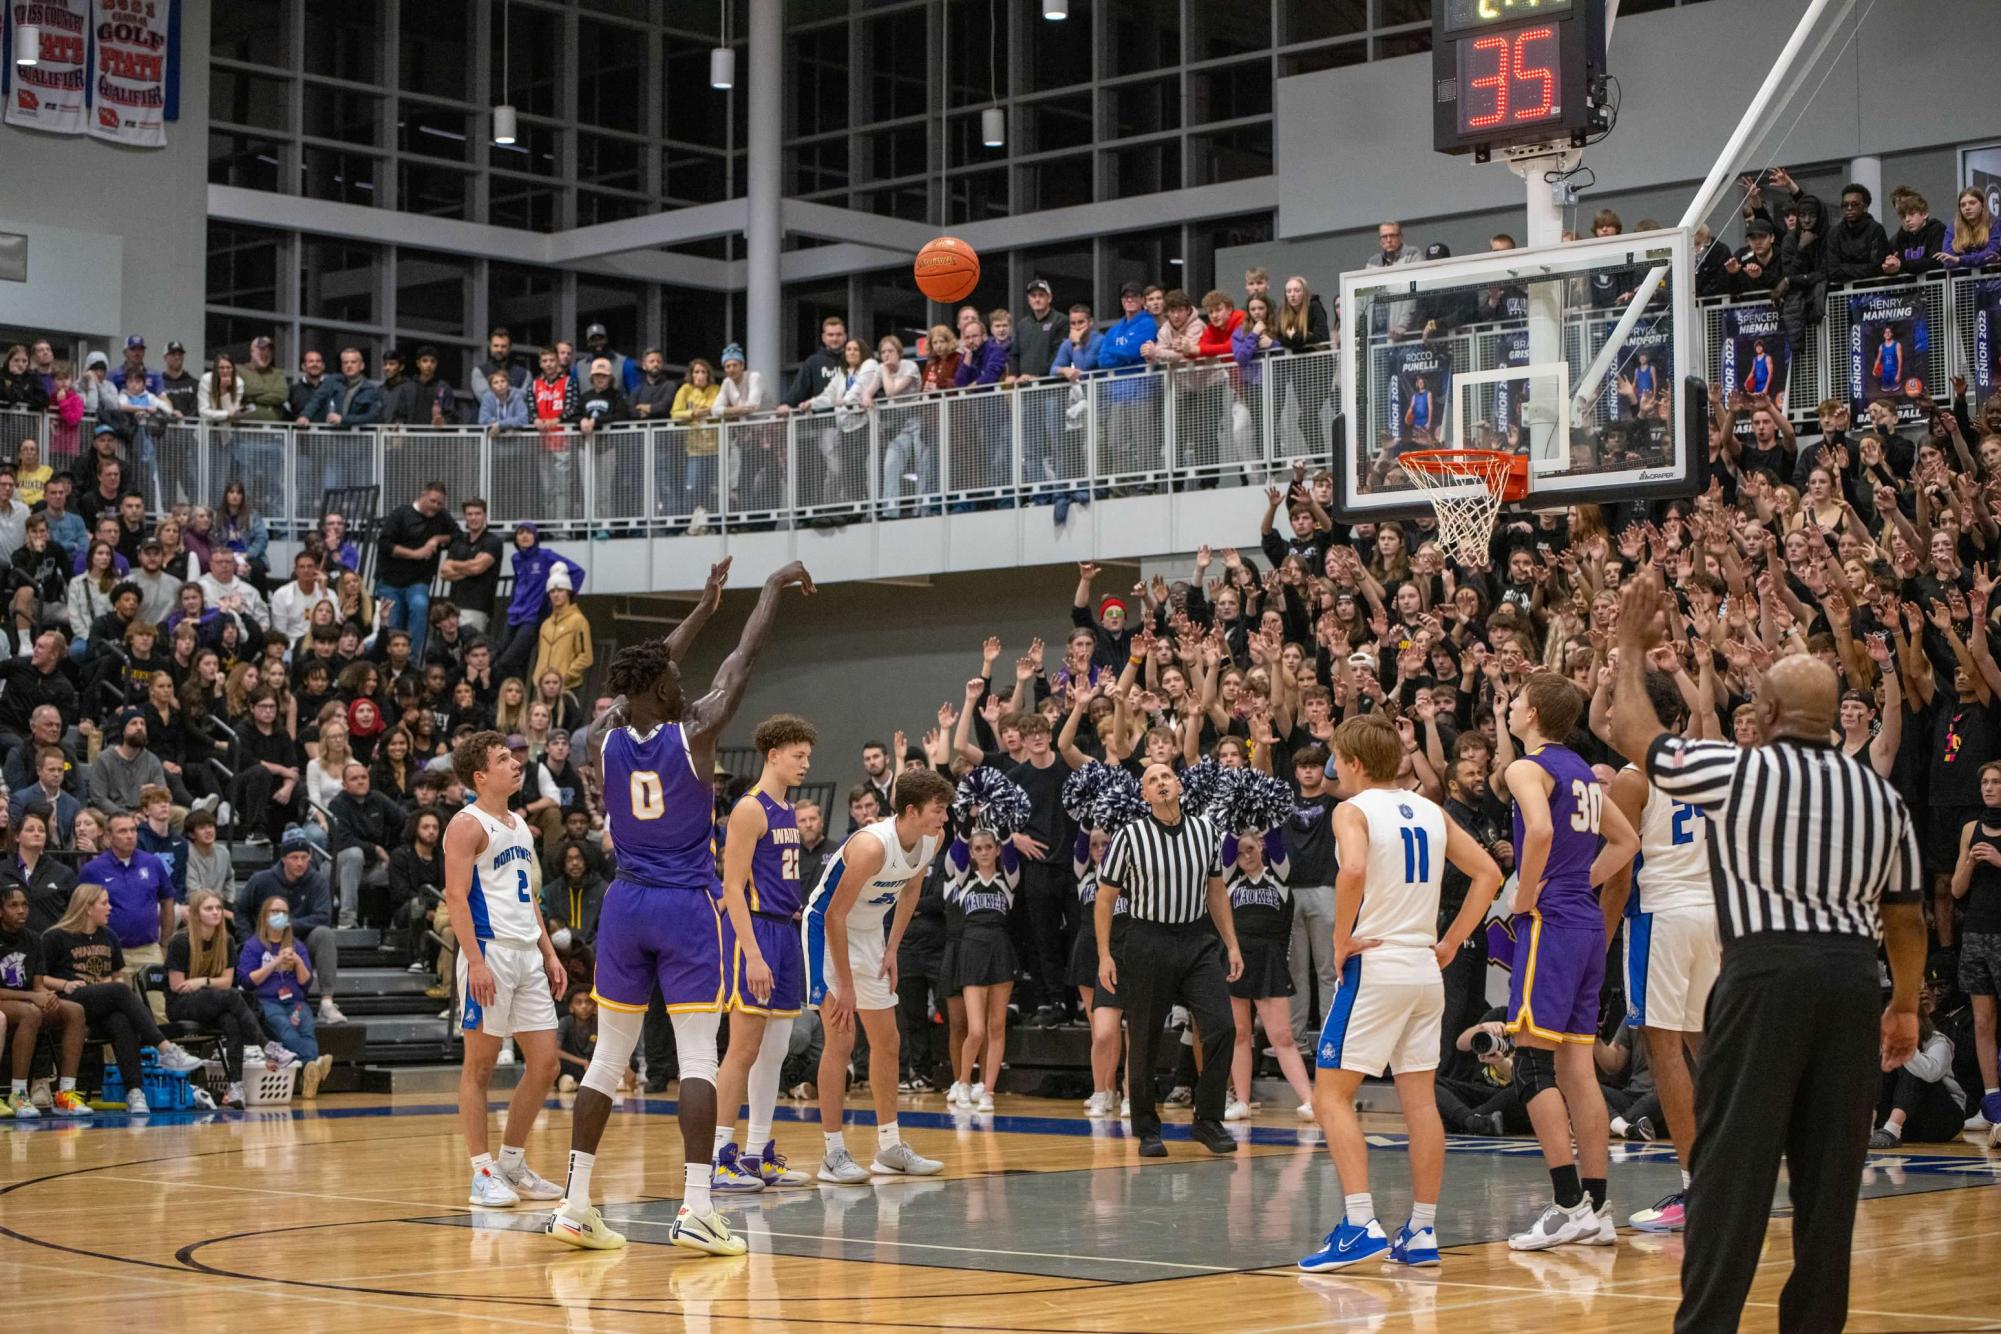 Omaha Biliew shoots a free throw in the home town rivalry game between Waukee and Waukee Northwest, Waukee Northwest High School, Dec. 6, 2022.